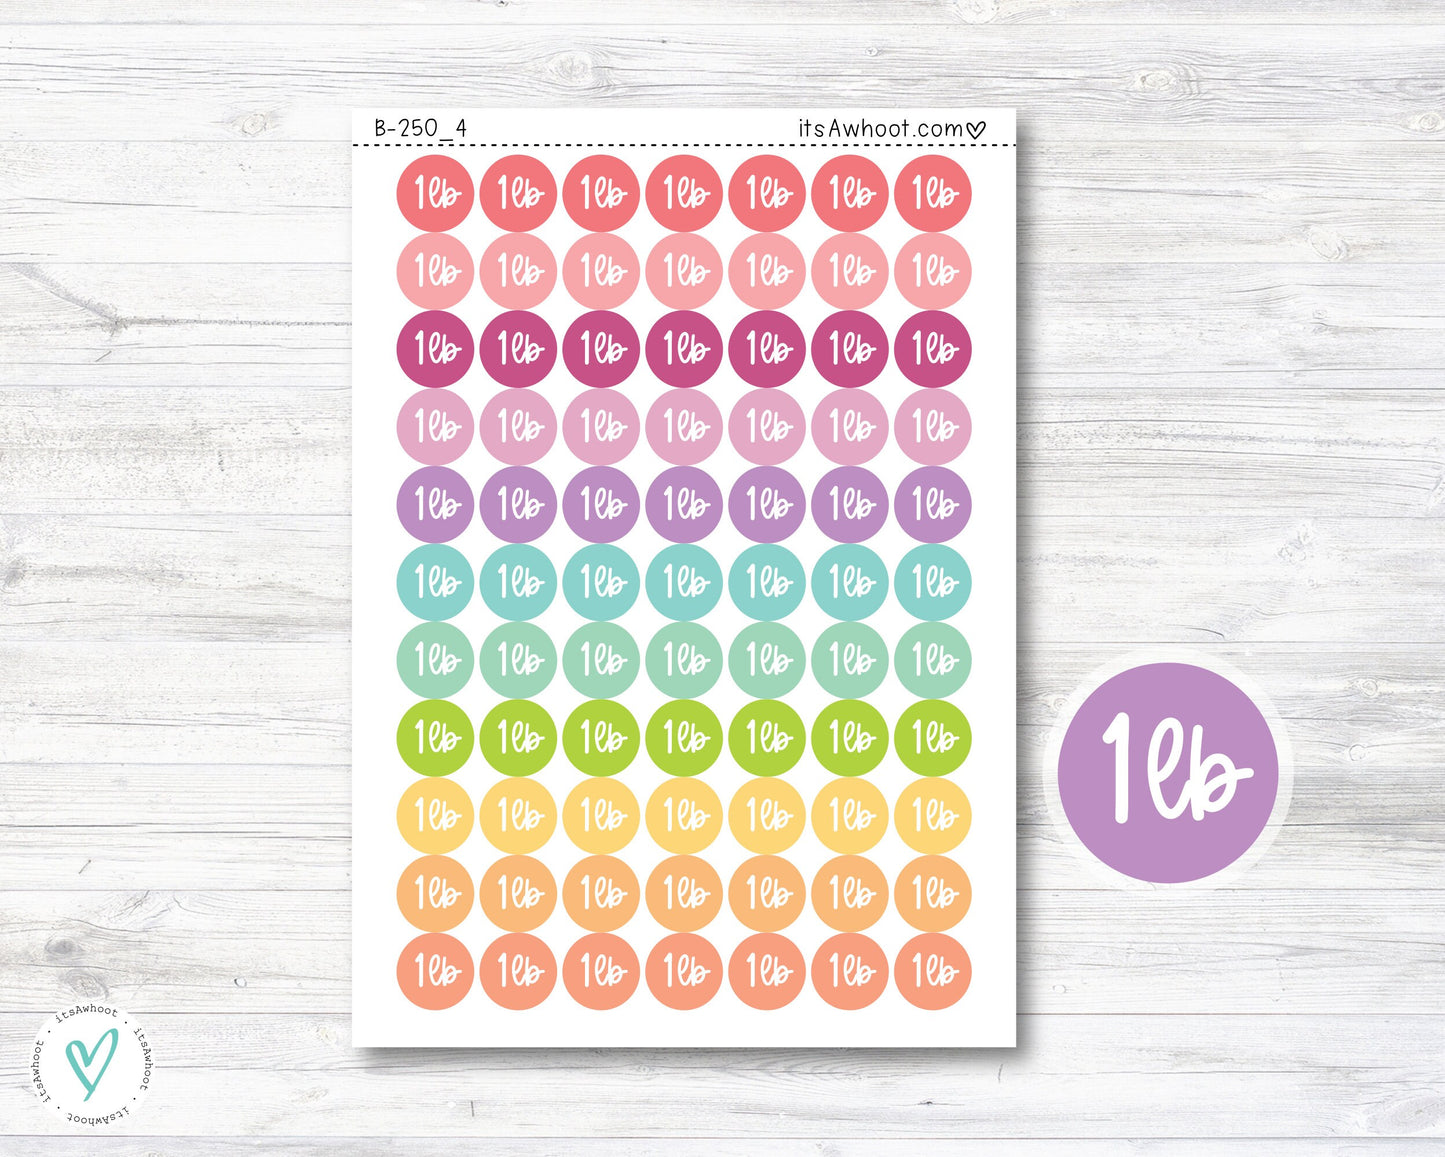 1 lb Weight Loss Tracker Planner Stickers, 1 Lb. Lost Stickers, Pounds Lost Stickers (B250_4)